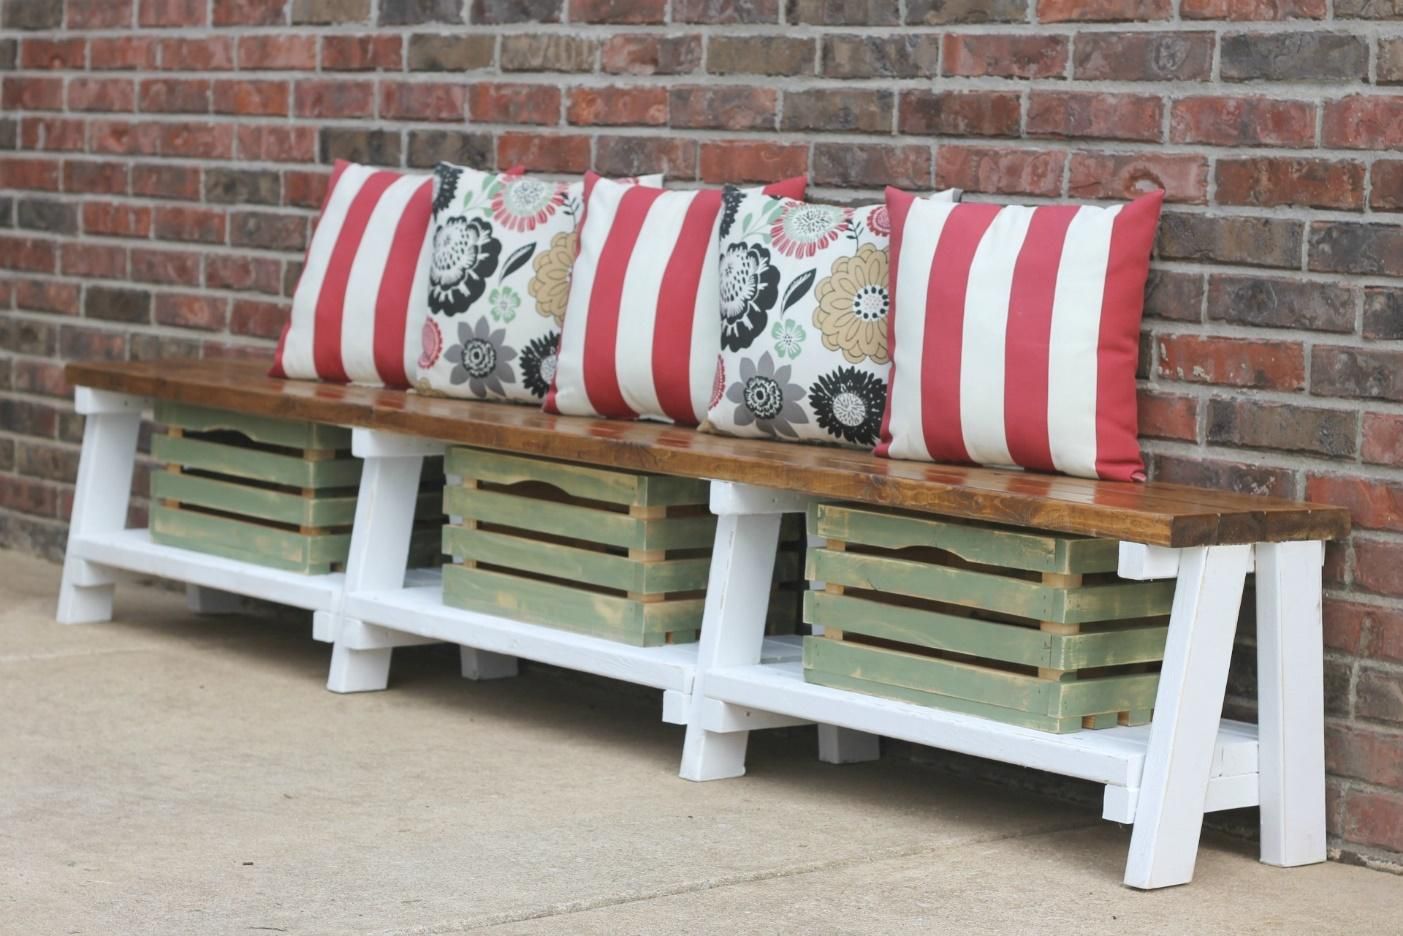 25 Ways to Decorate With Wooden Crates